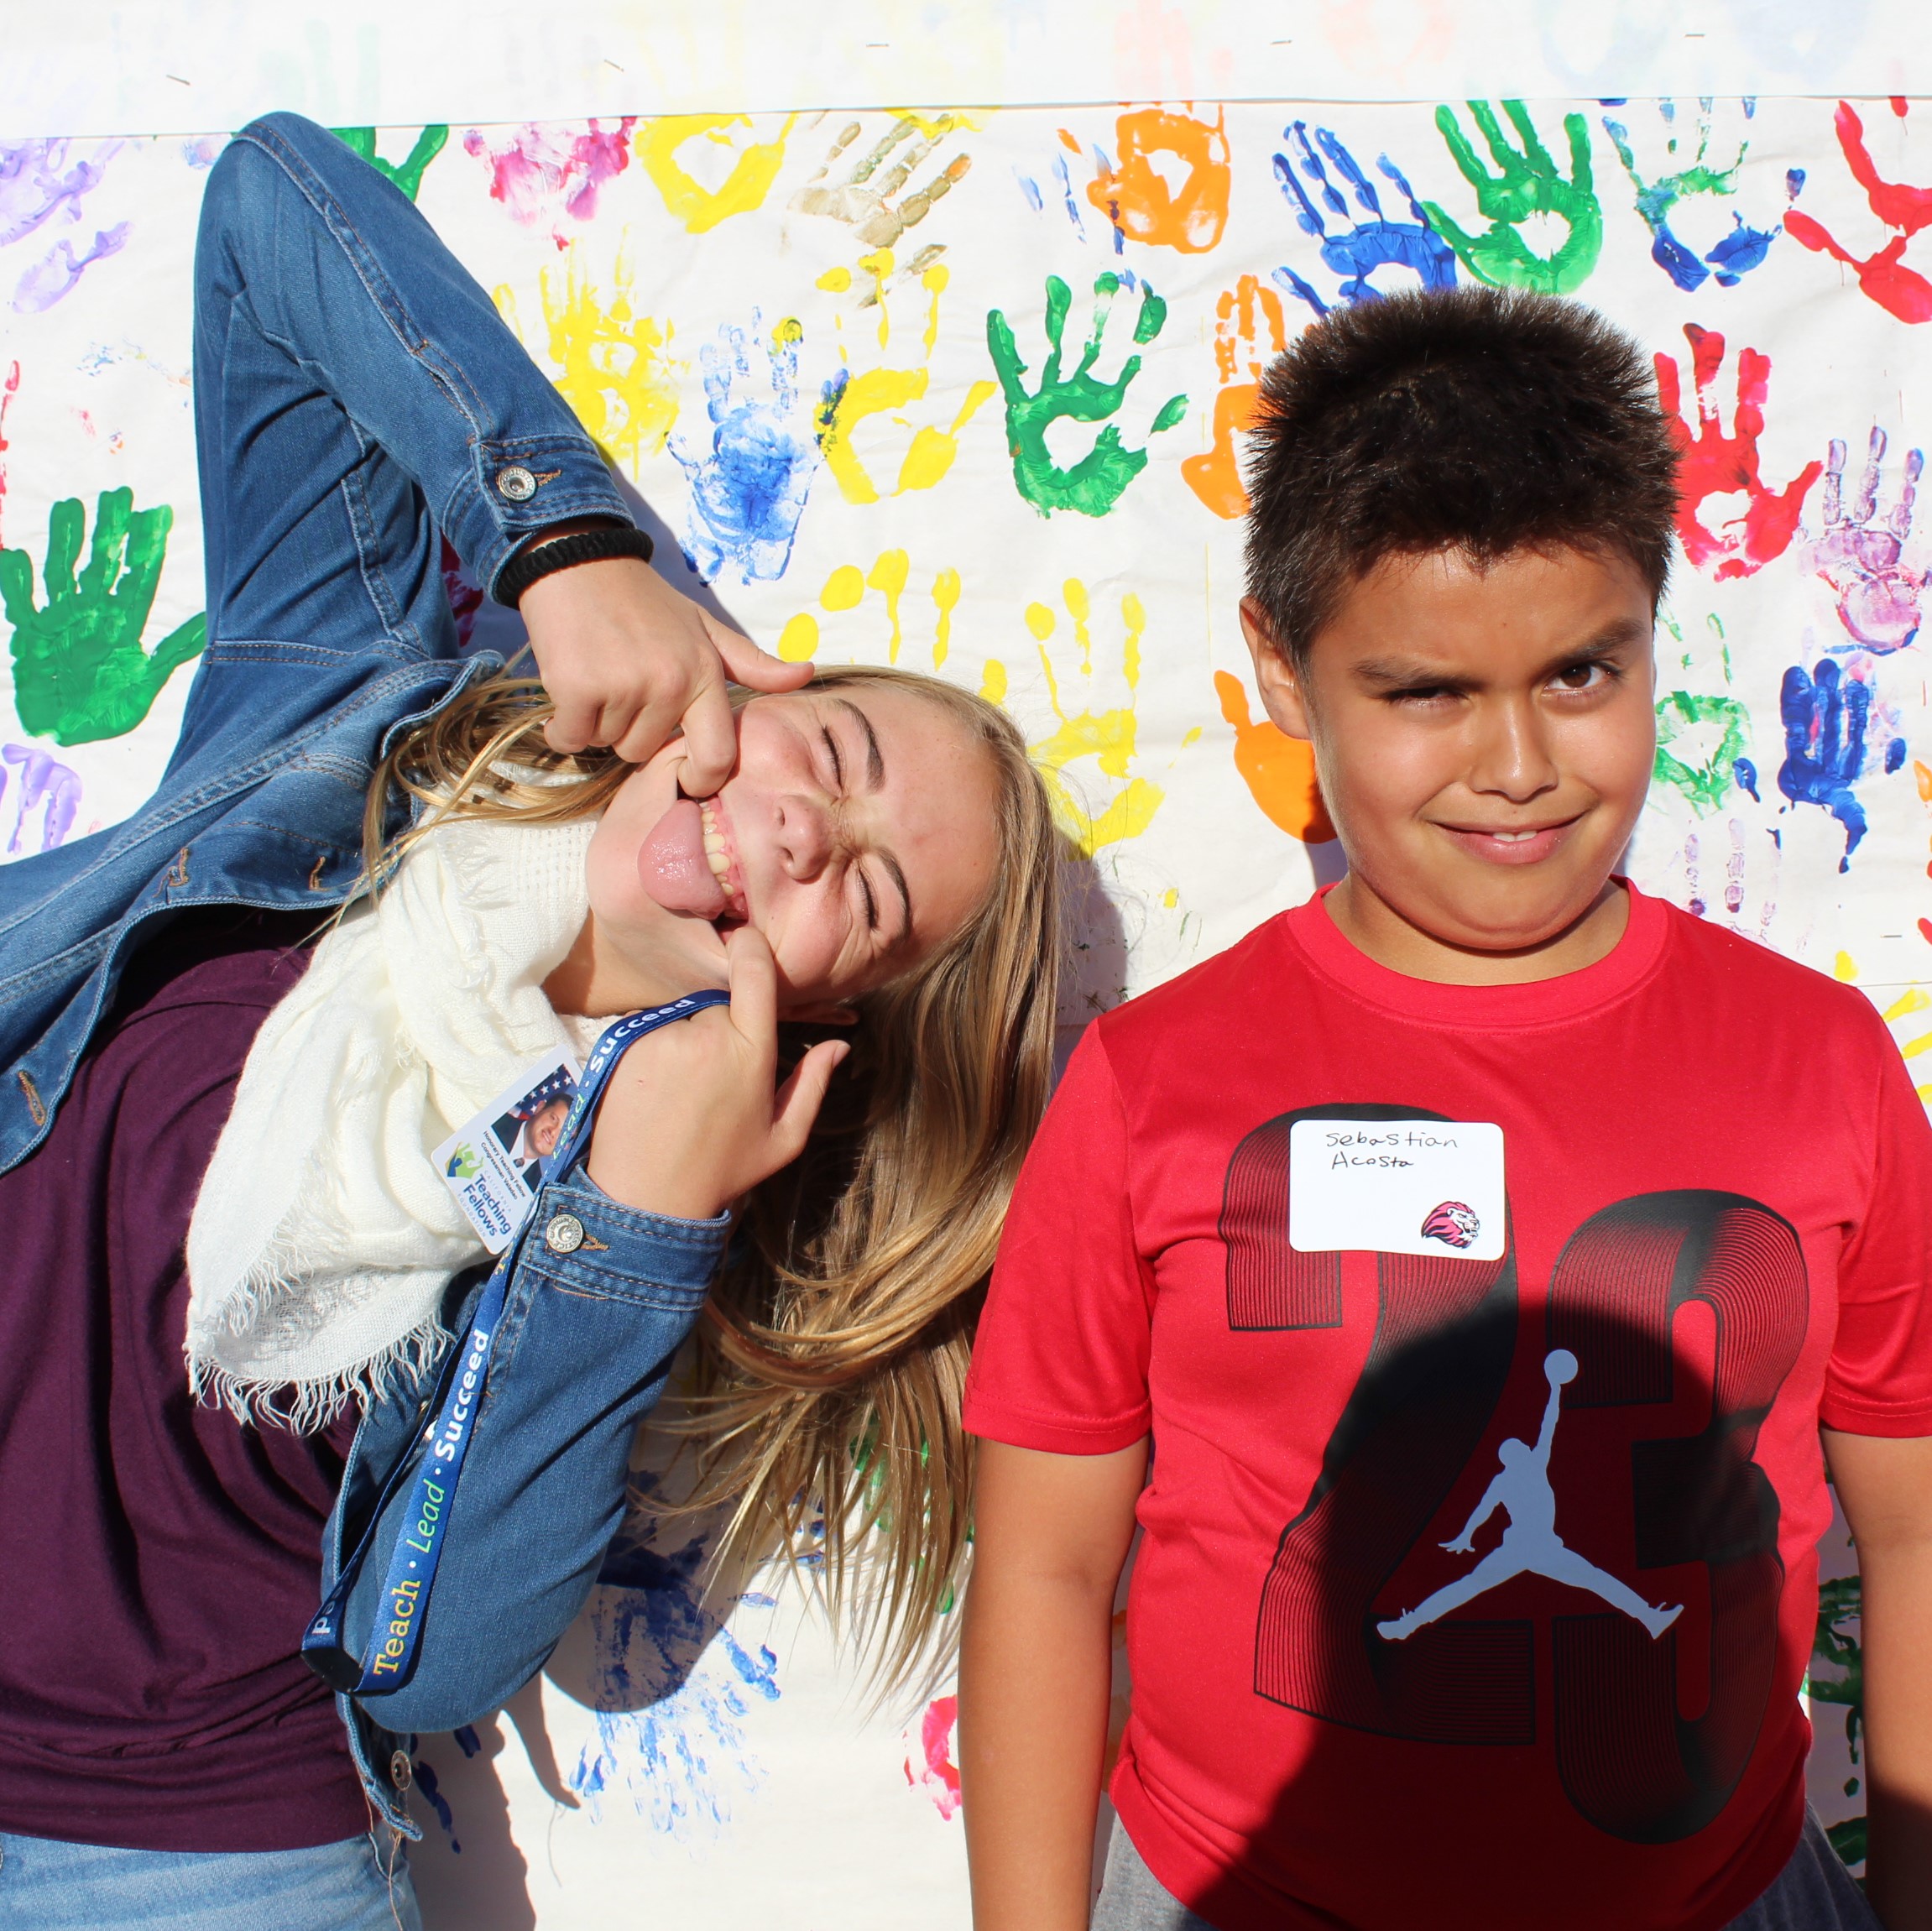 A Teaching Fellow poses with a silly face alongside a young male student in a red shirt in front of a backdrop full of painted hands in a rainbow of colors.